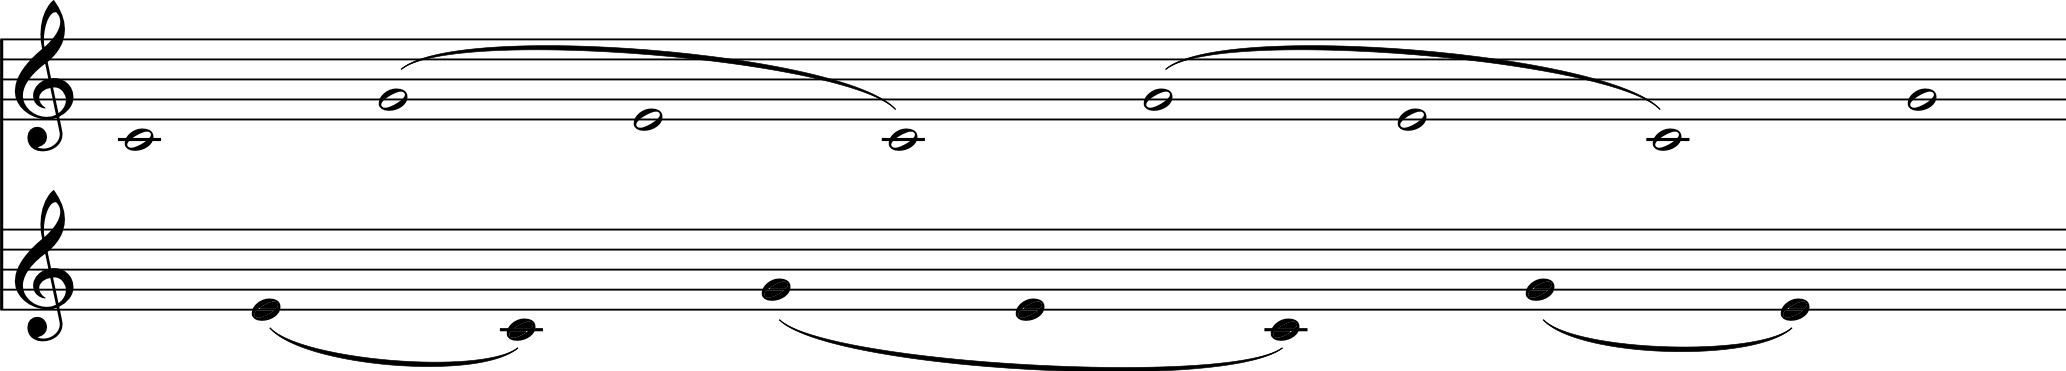 Wessel Illusion: as the tempo increases, the percept switches from a single repeated ascending line, to two descinding lines.